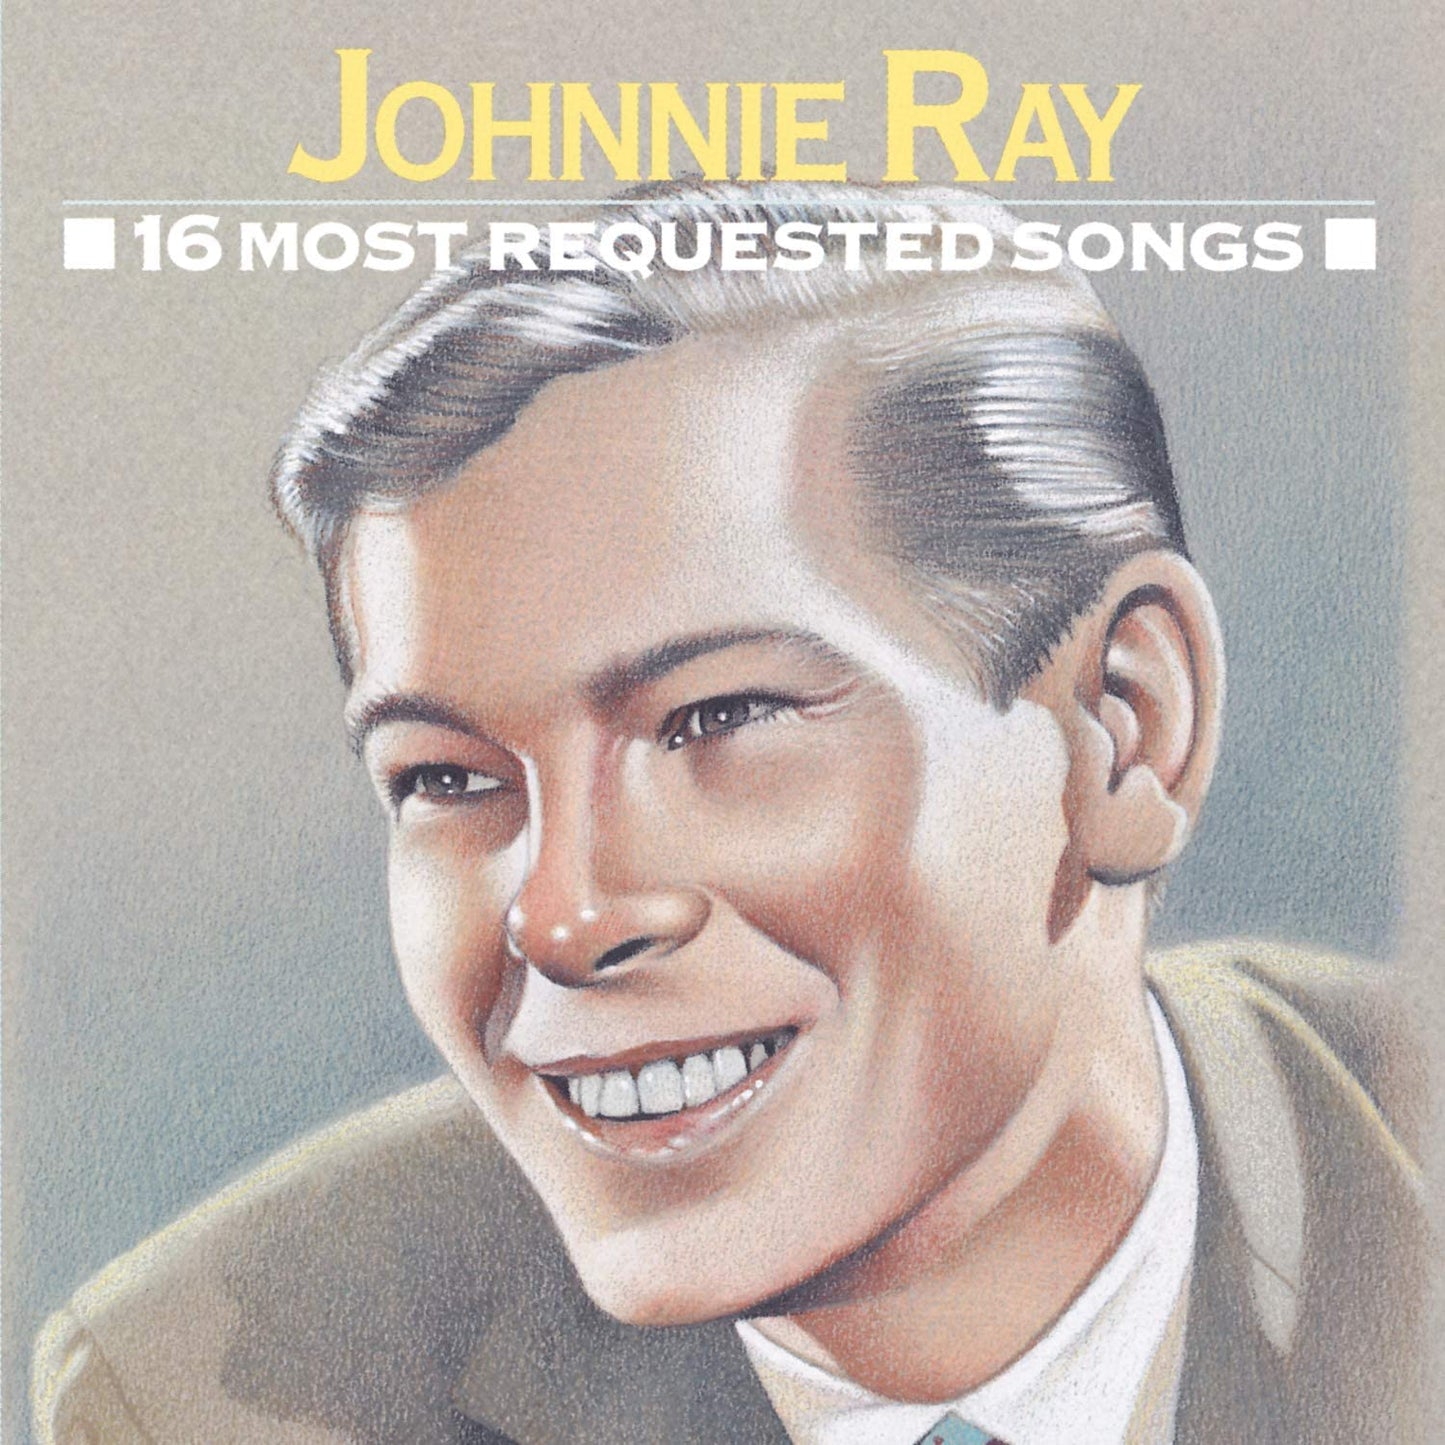 16 Most Requested Songs [Audio CD]  Johnny Ray